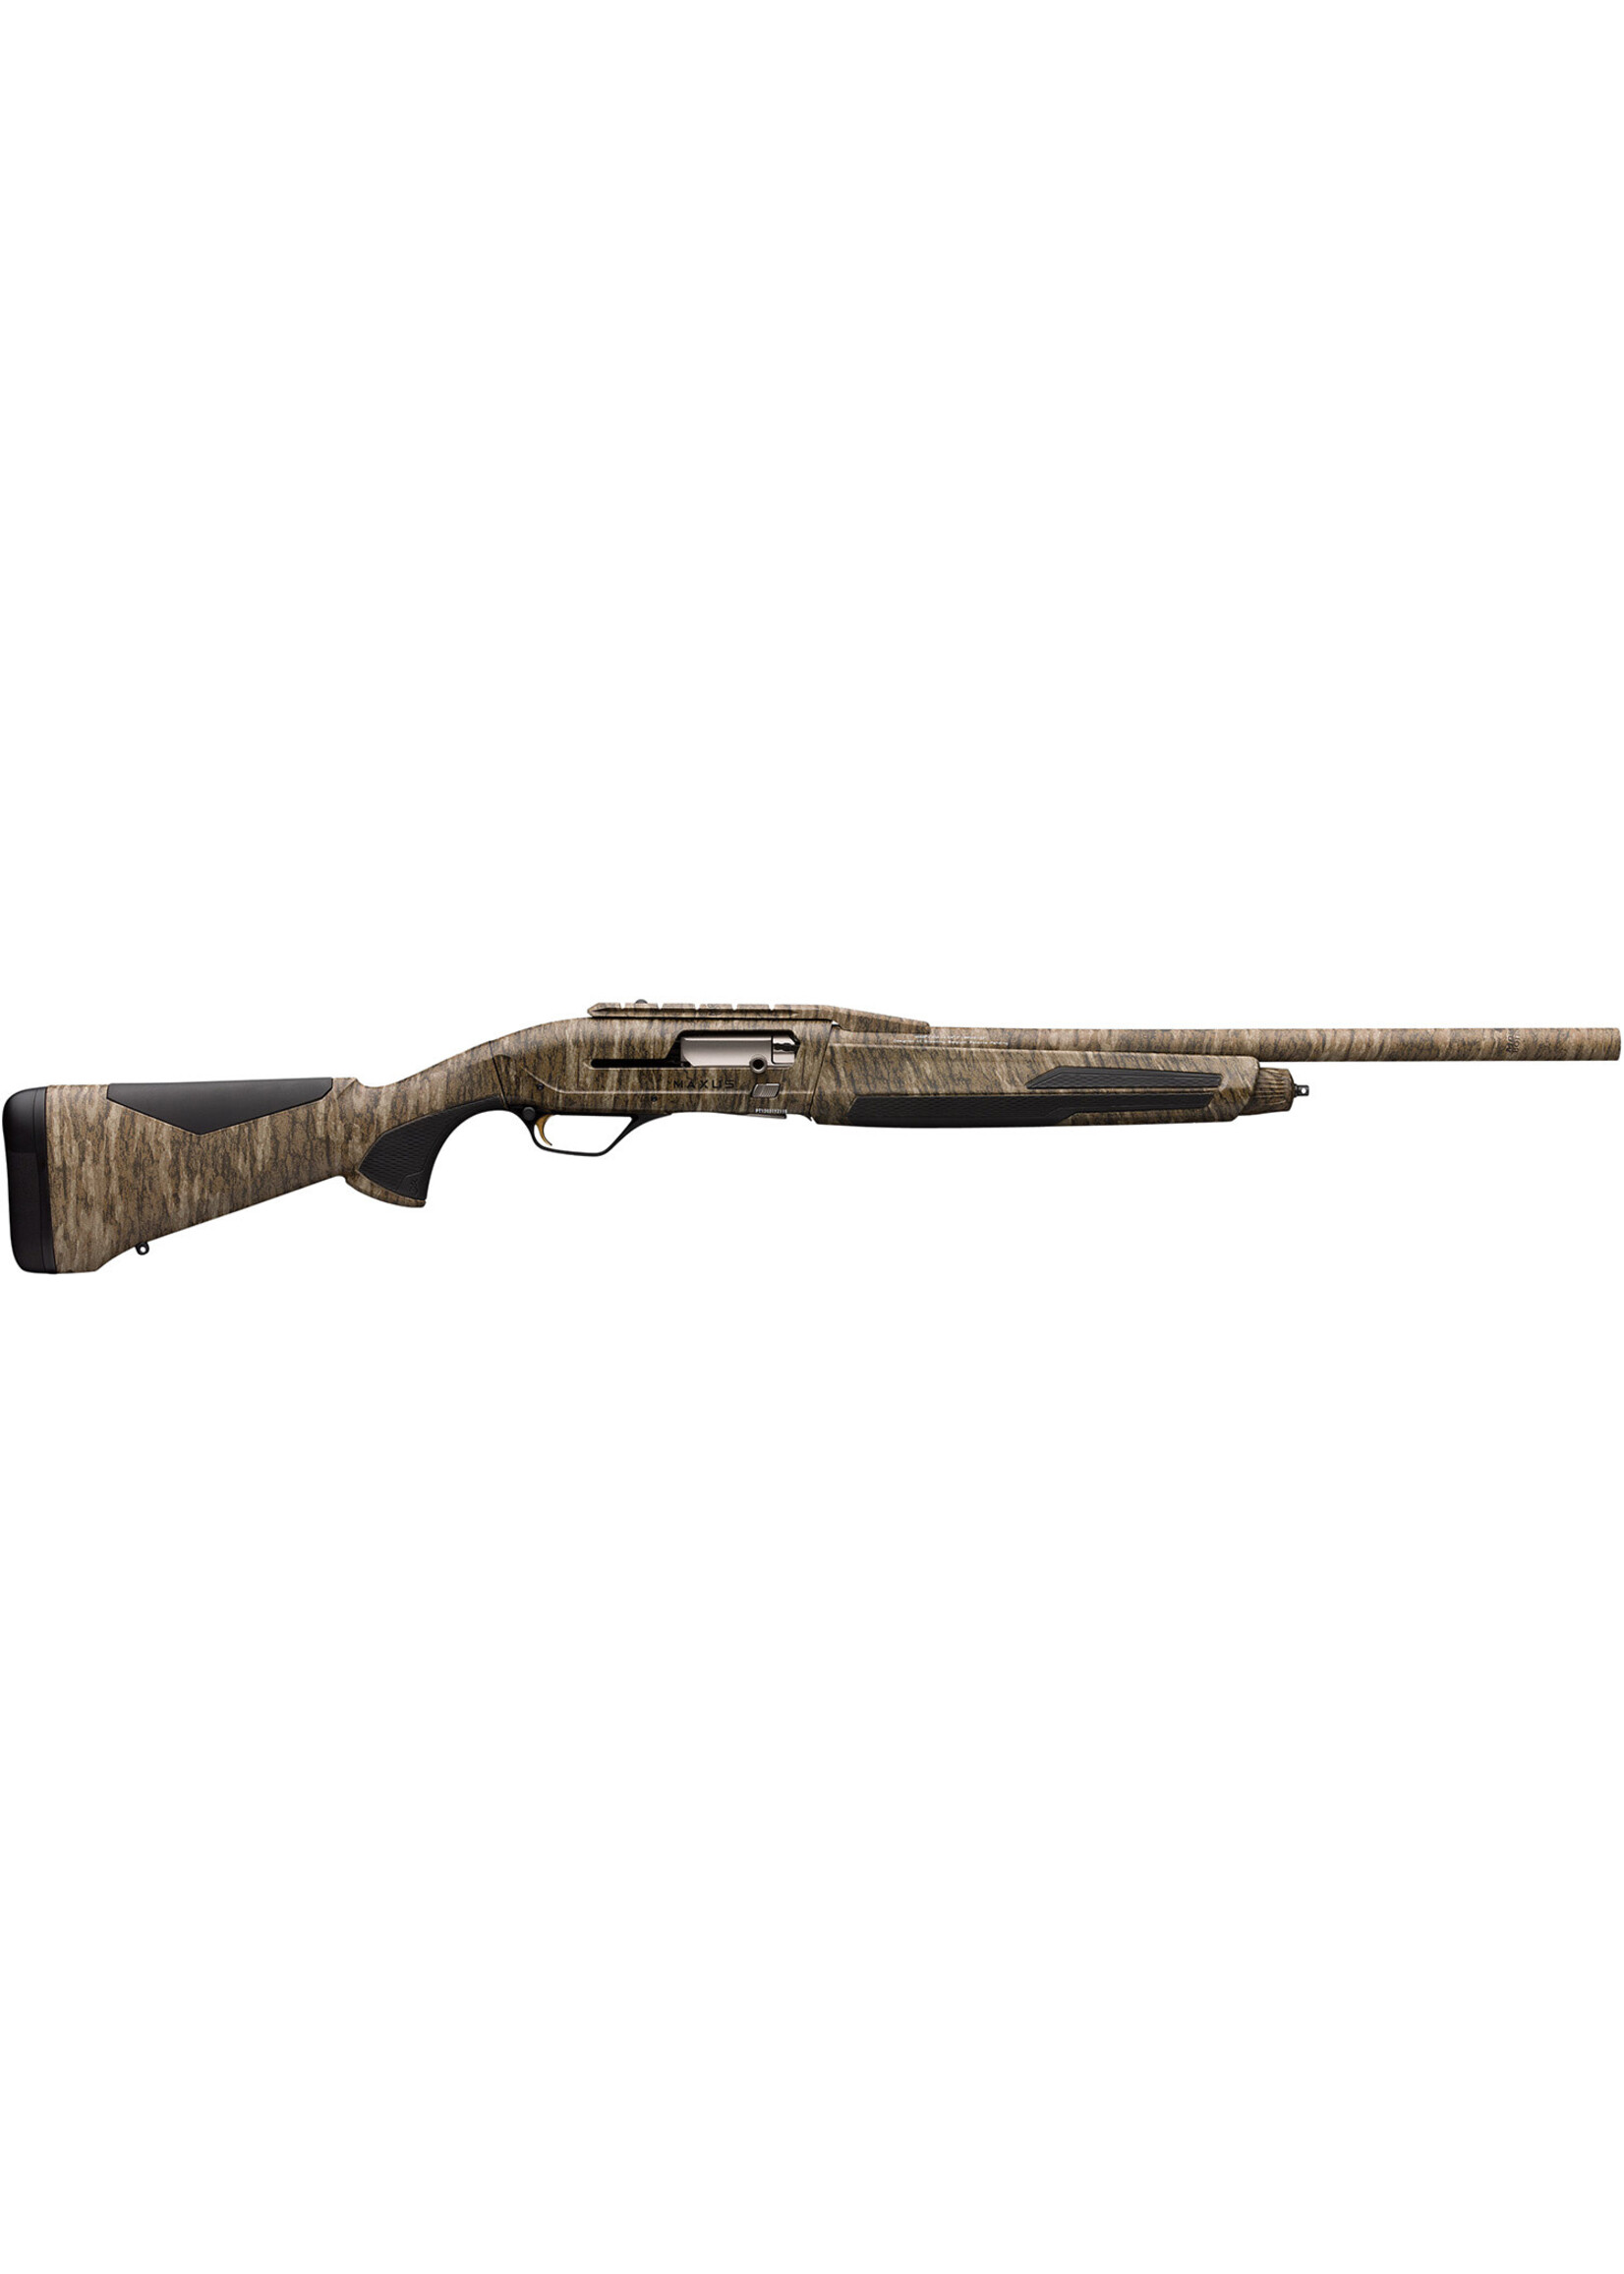 Browning Browning 011745321 Maxus II Rifled Deer 12 Gauge 3" 4+1 22" Fully Rifled Barrel, Mossy Oak Bottomland, Synthetic Furniture with Overmolded Grip Panels, Weaver Style Scope Mount